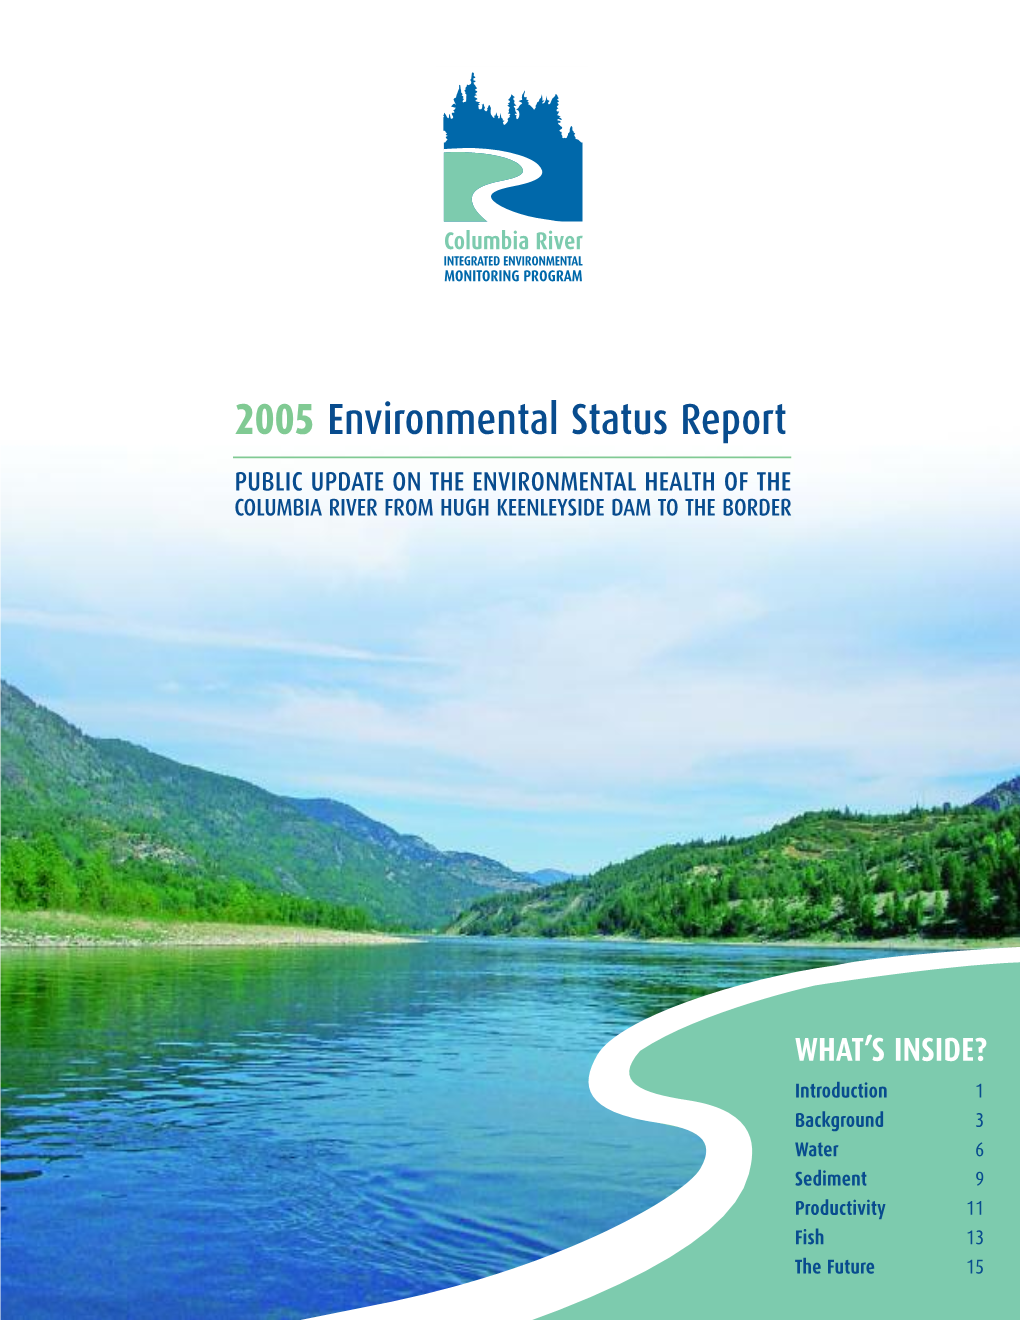 2005 Environmental Status Report PUBLIC UPDATE on the ENVIRONMENTAL HEALTH of the COLUMBIA RIVER from HUGH KEENLEYSIDE DAM to the BORDER